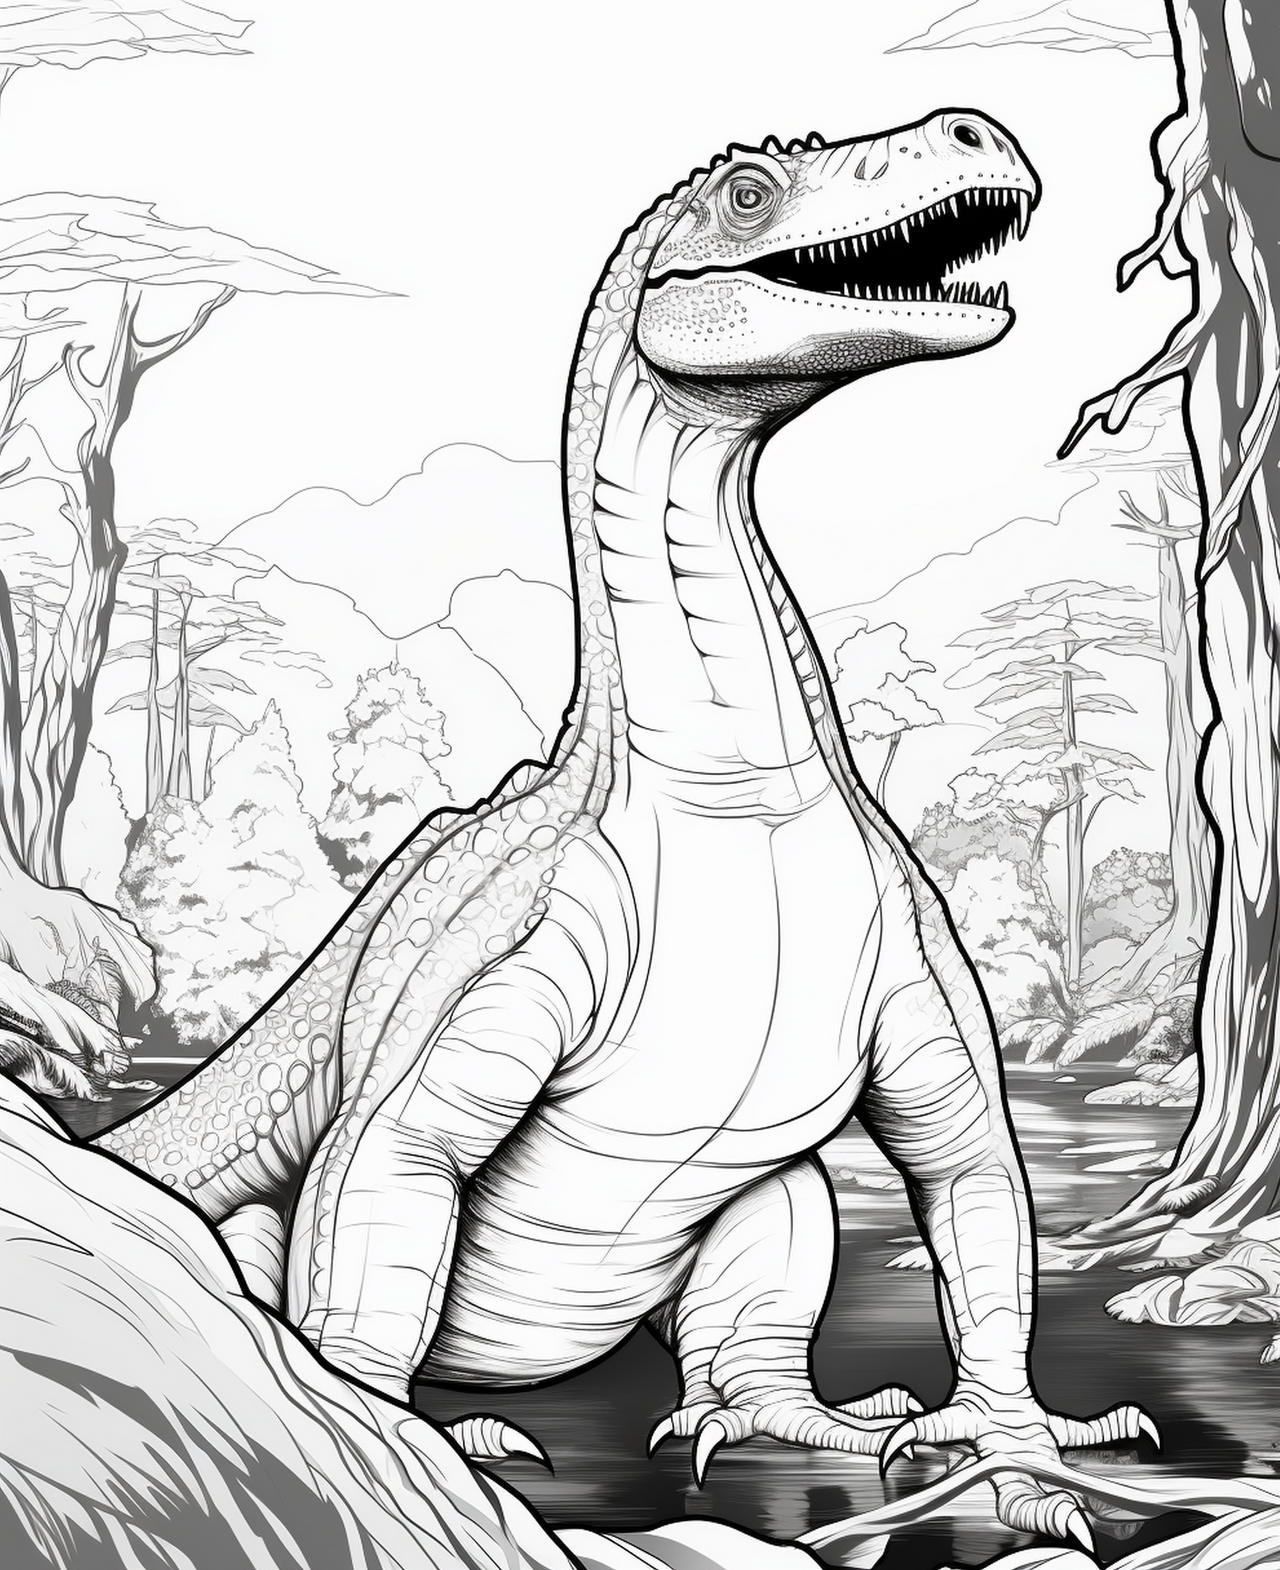 Dinosaurs coloring pages in premium quality by coloringbooksart on